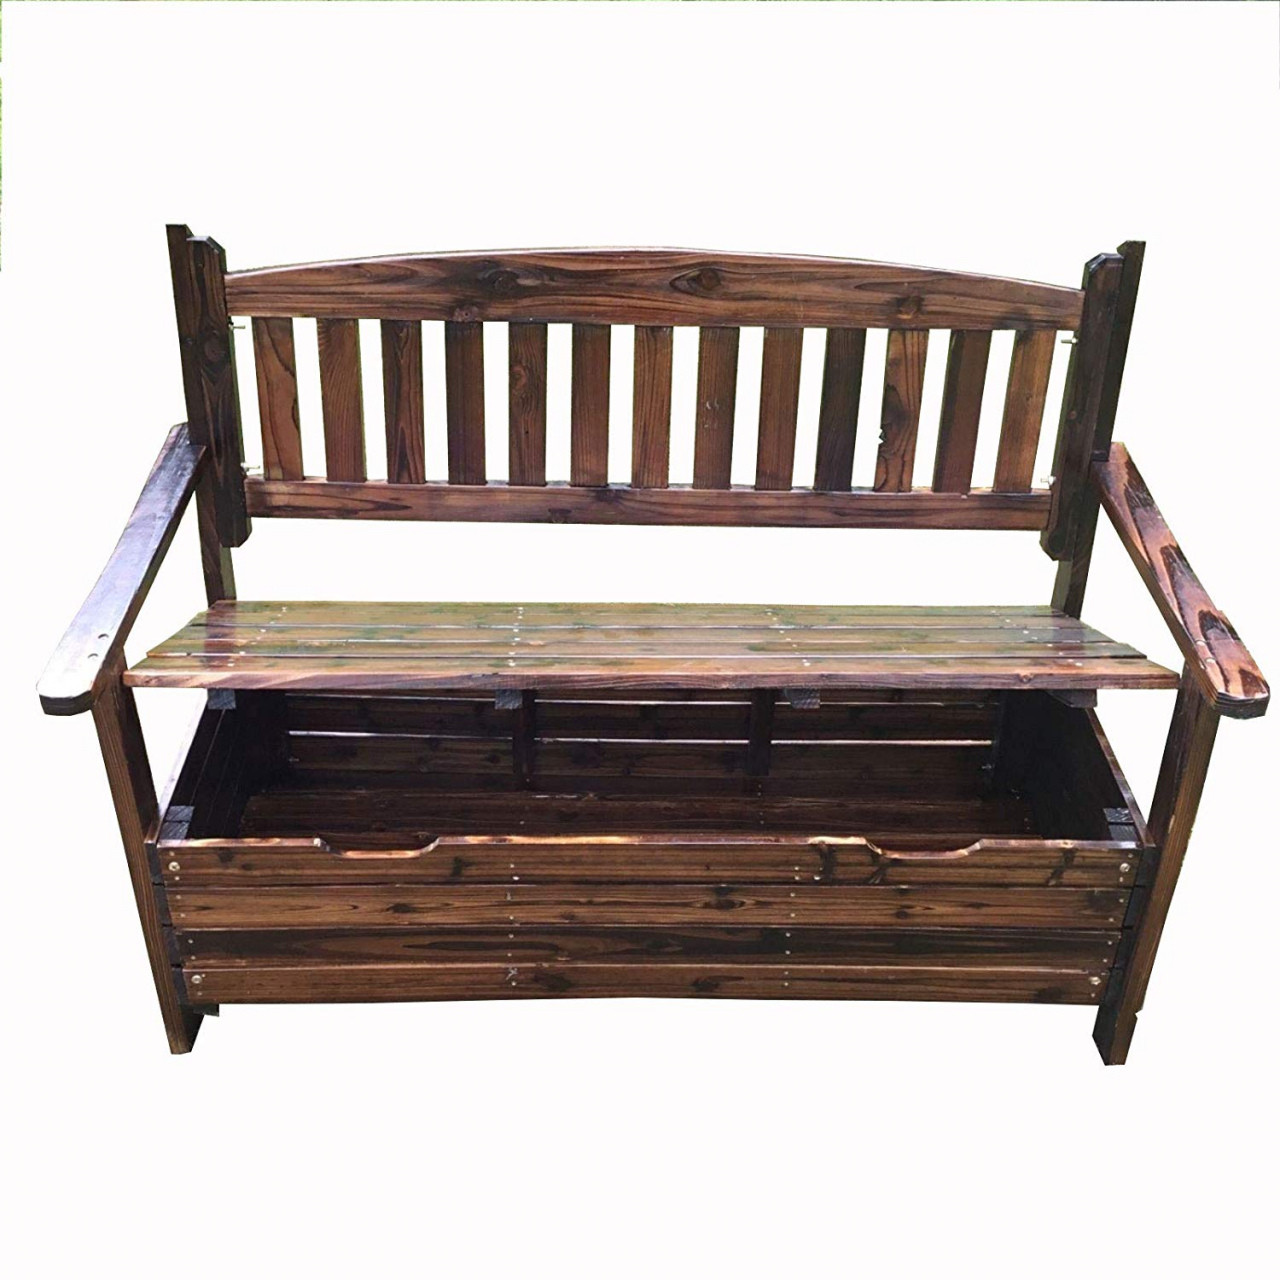 Long Wooden Storage Bench
 Wooden Long Storage Bench